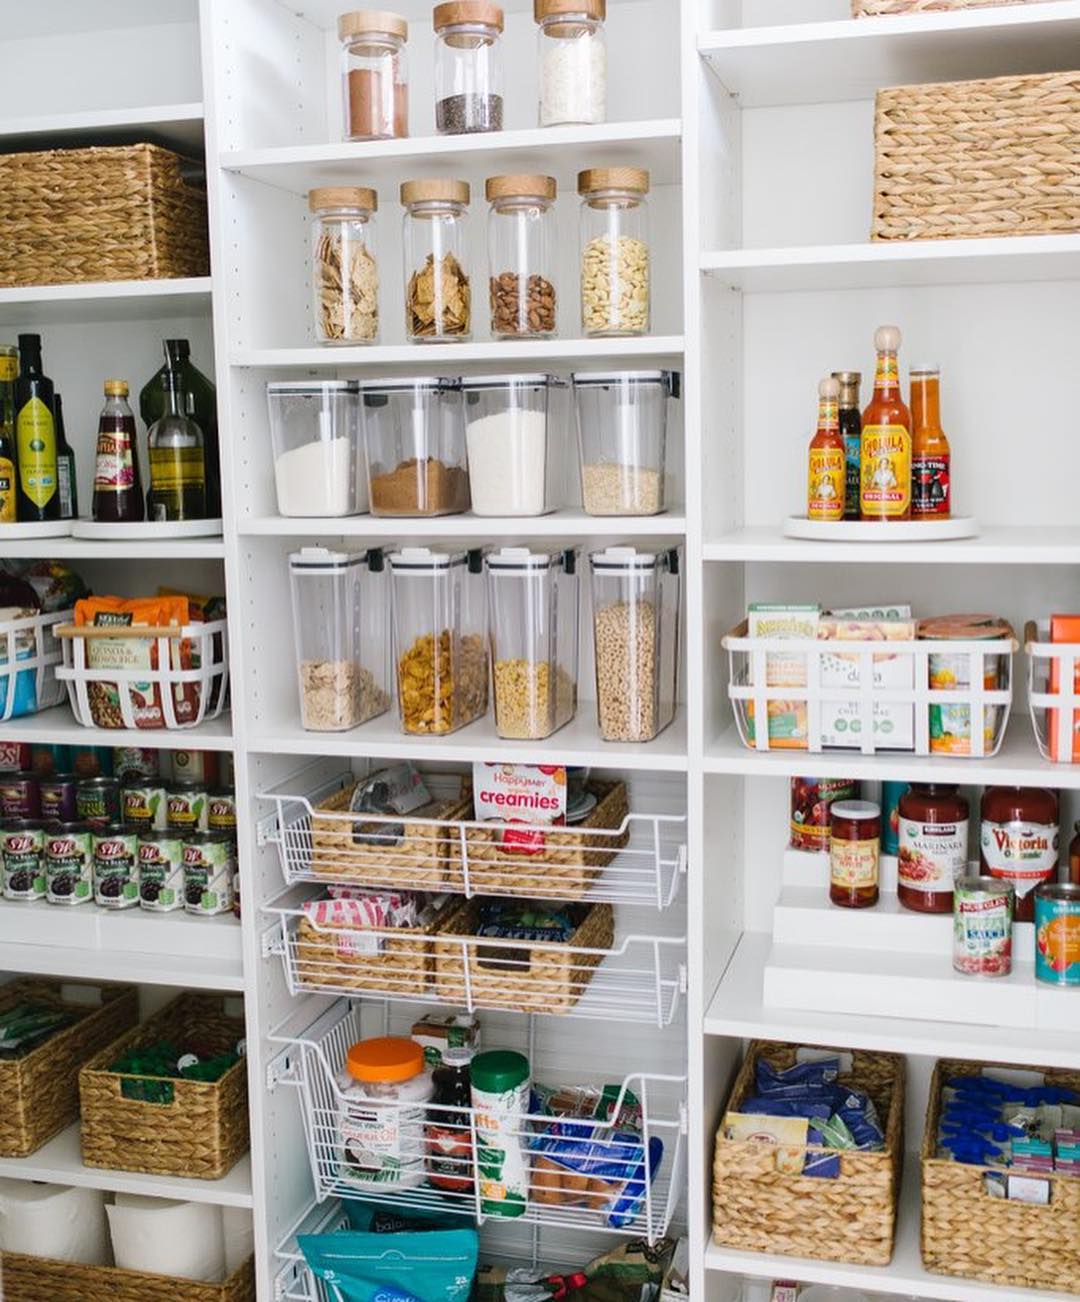 Well Organized Pantry at Home. Photo by Instagram user @joanna_organize